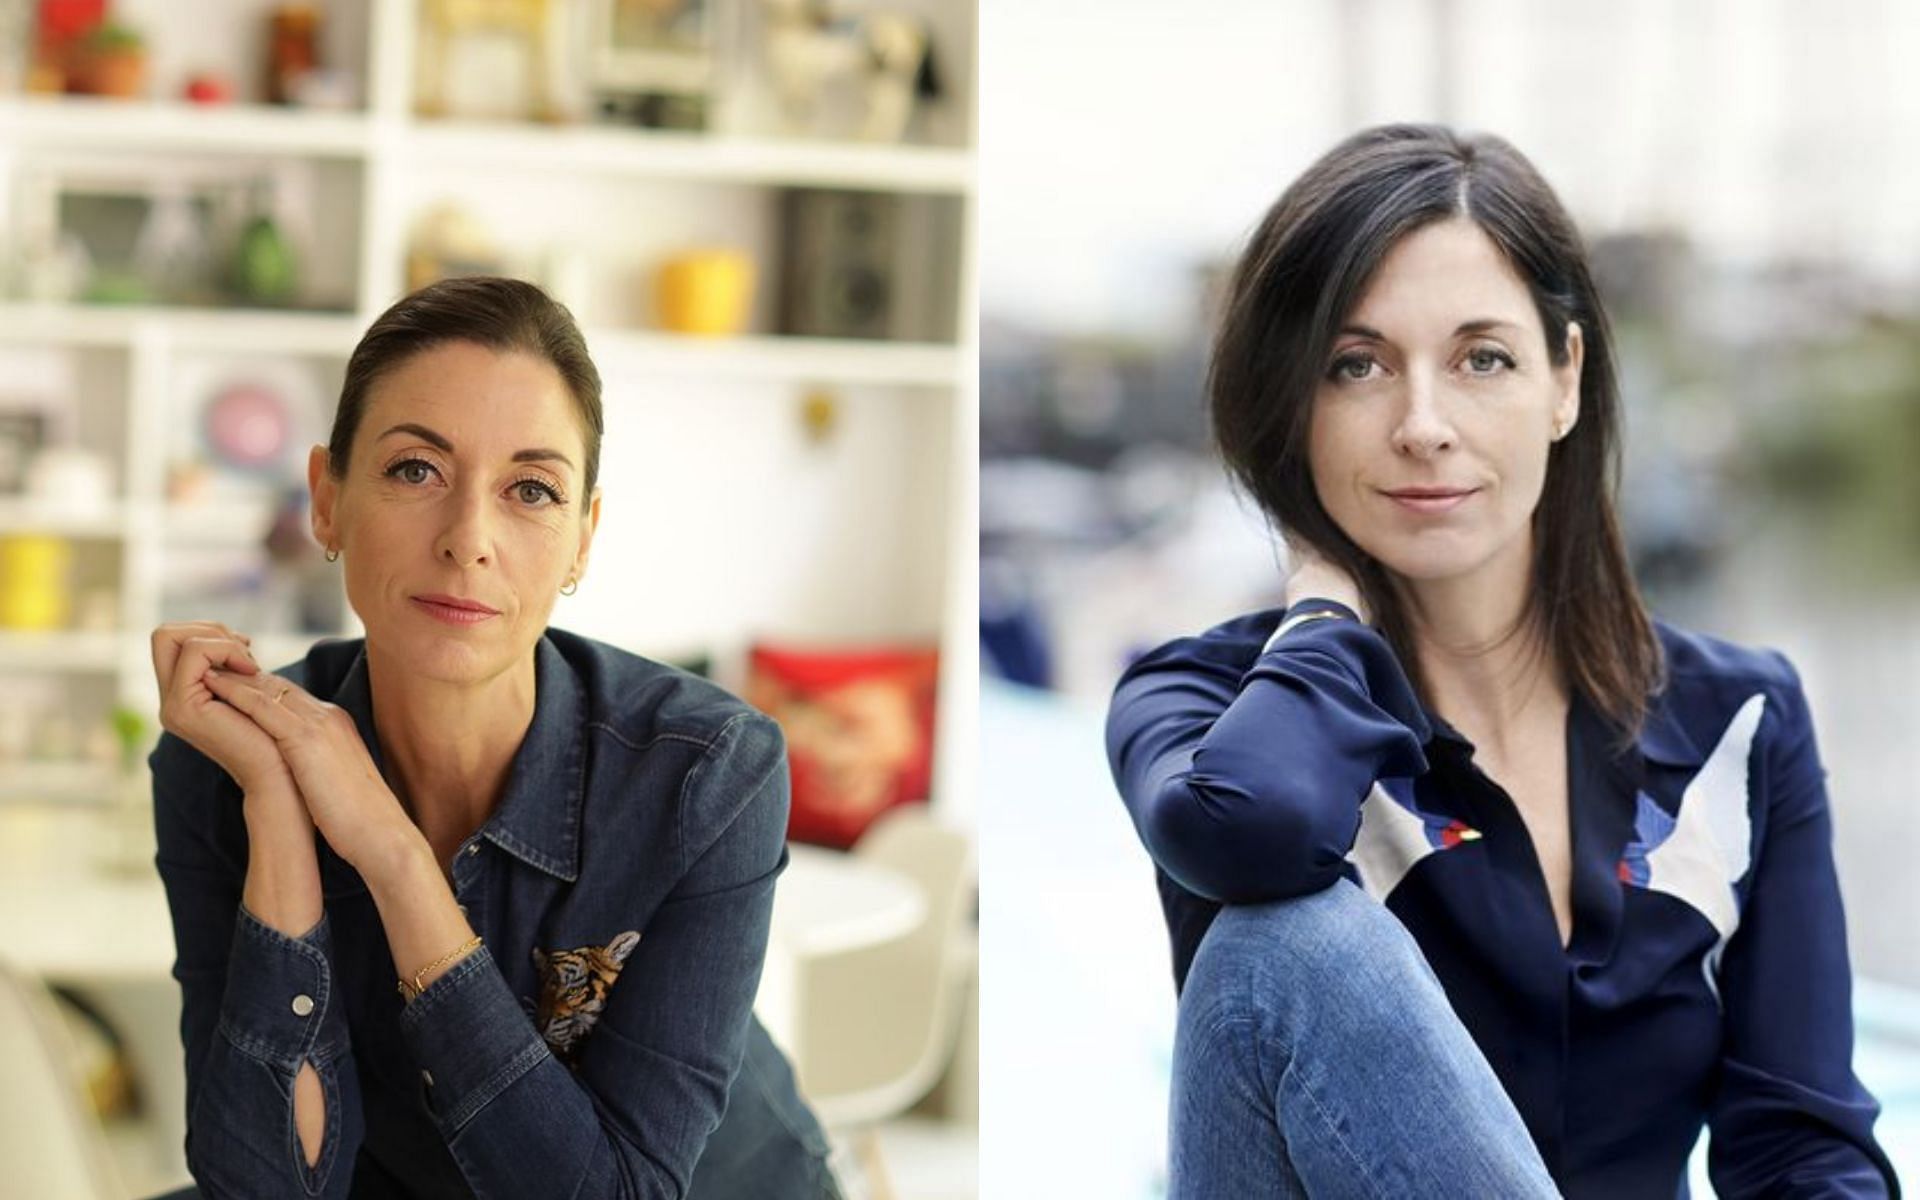 Mary McCartney is a vegan and vegetarian cook (Images via Discovery+ and Happy Foodie)